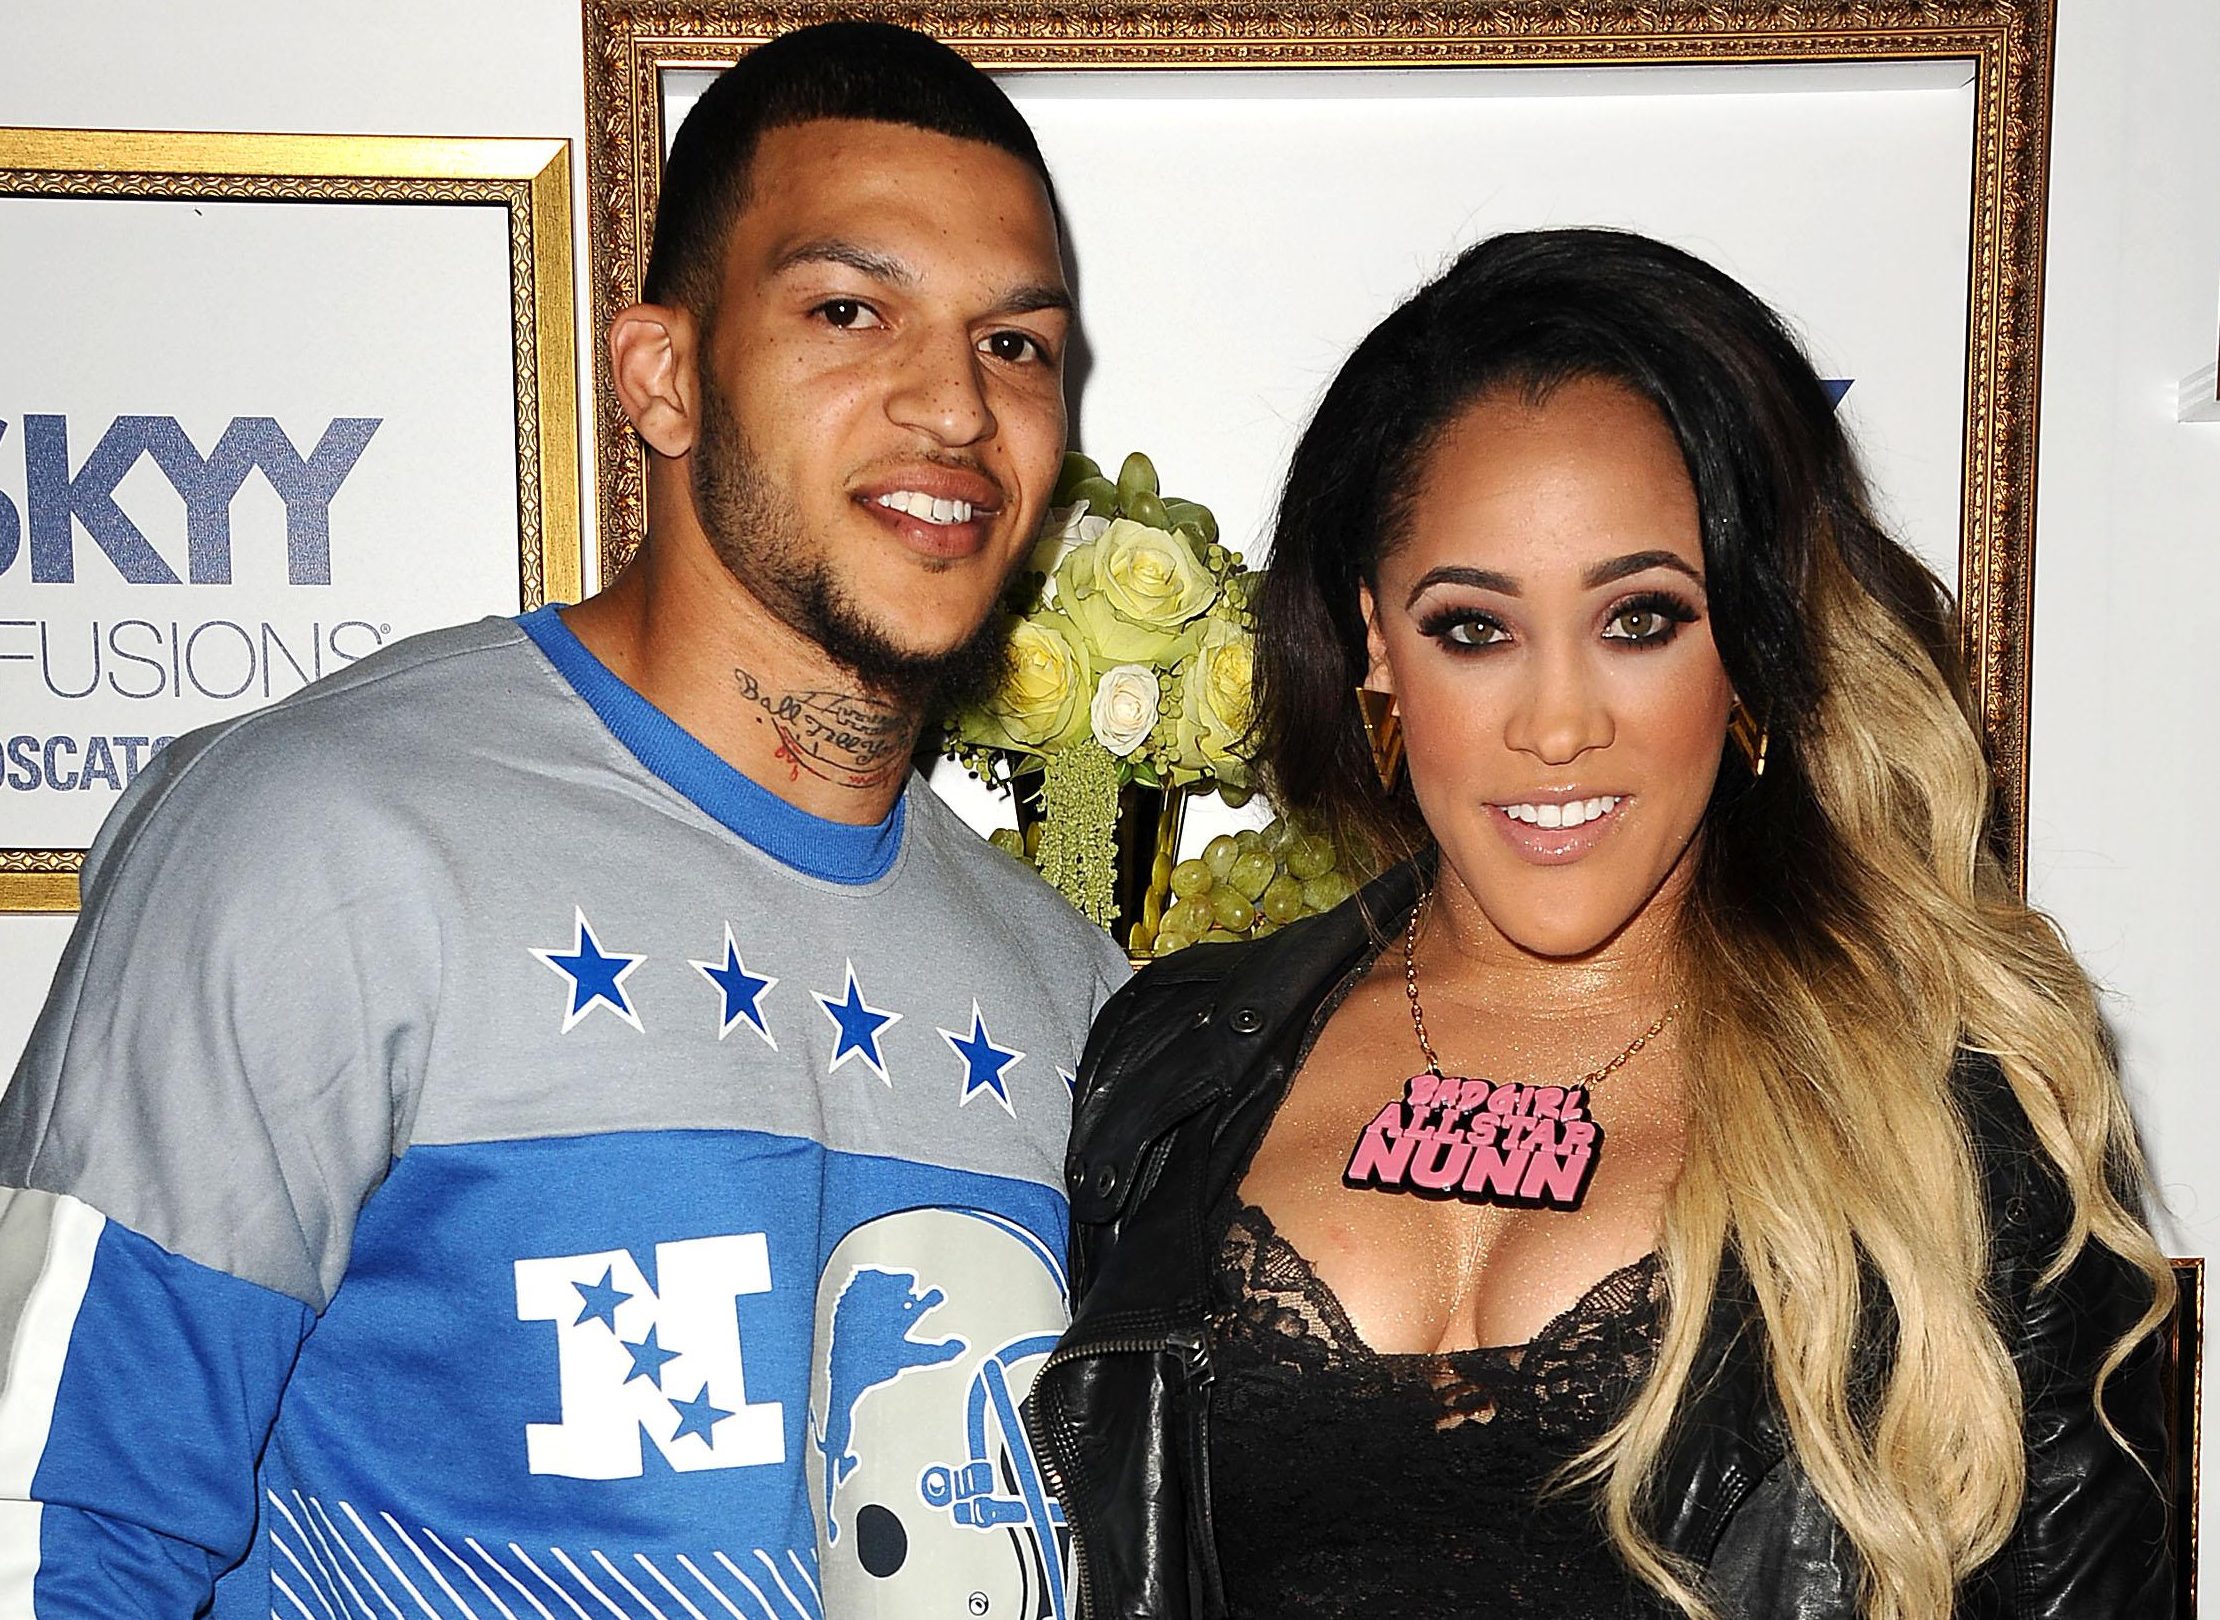 Natalie Nunn And Hubby Head To The Uk To Confront Her Threesome Accuser